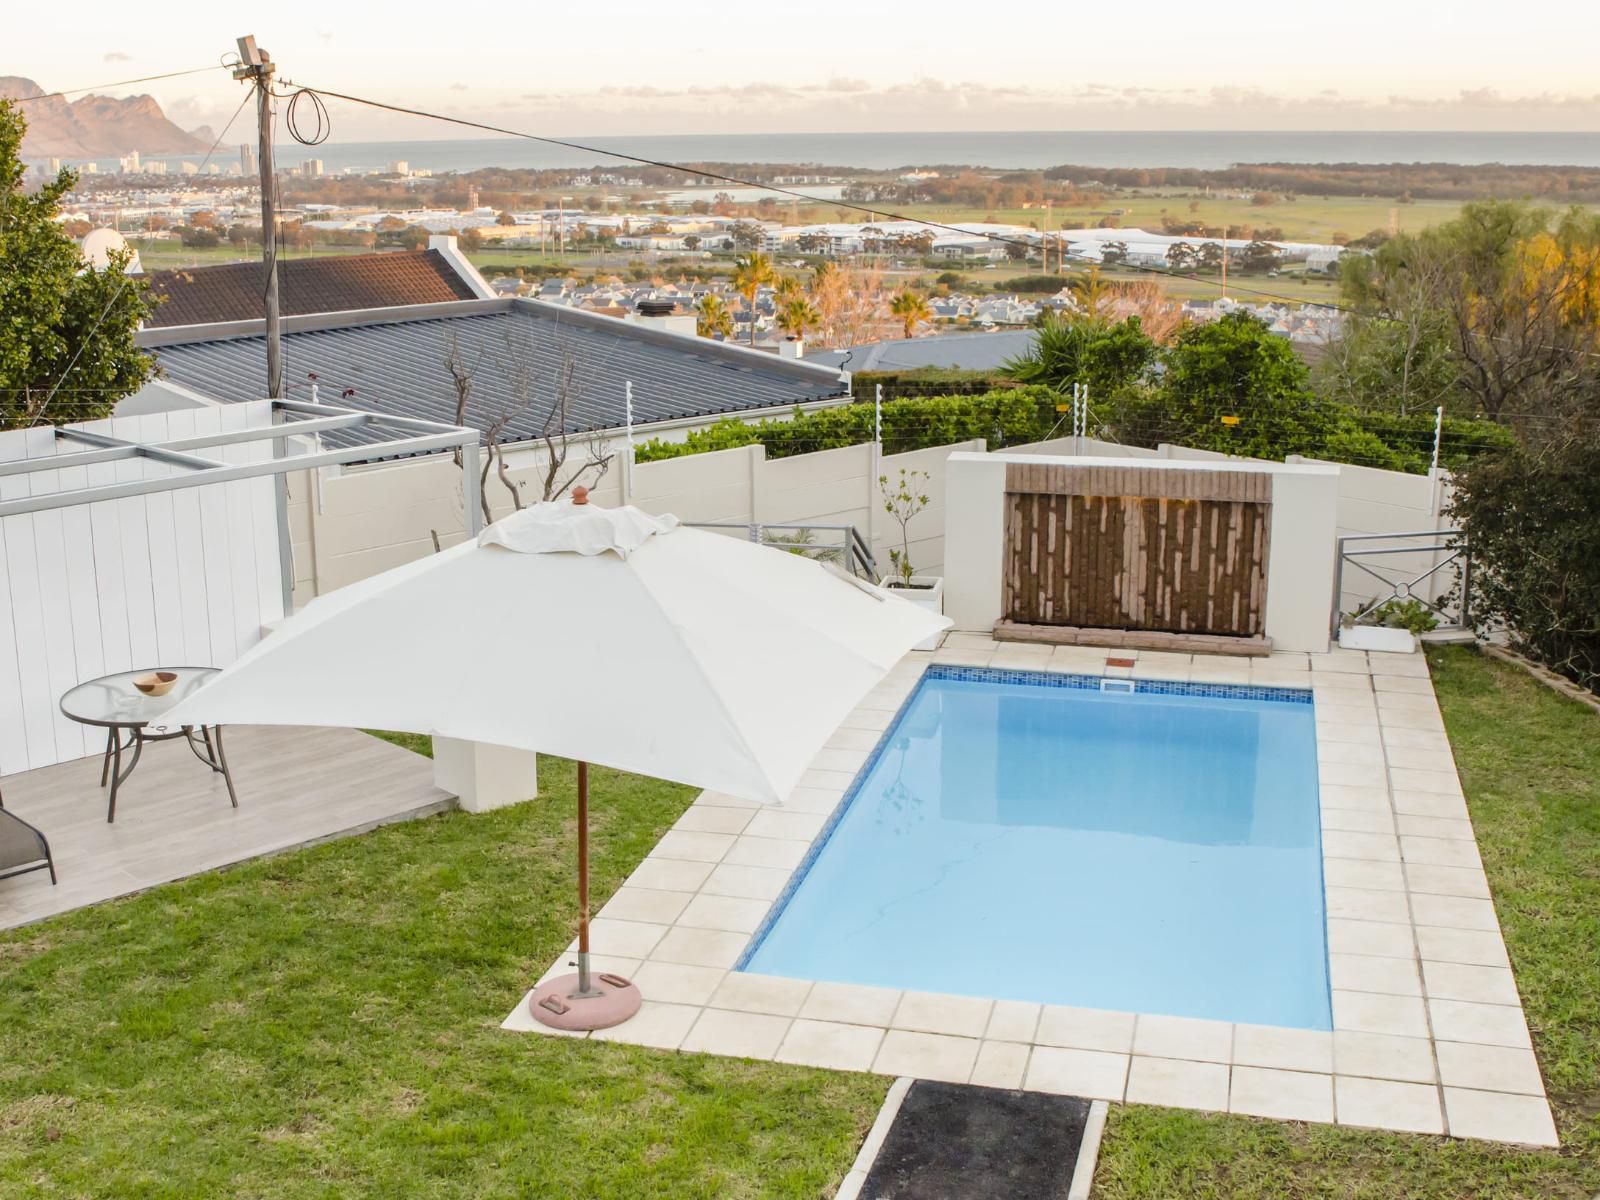 Somersetview Guest House Heldervue Somerset West Western Cape South Africa House, Building, Architecture, Swimming Pool